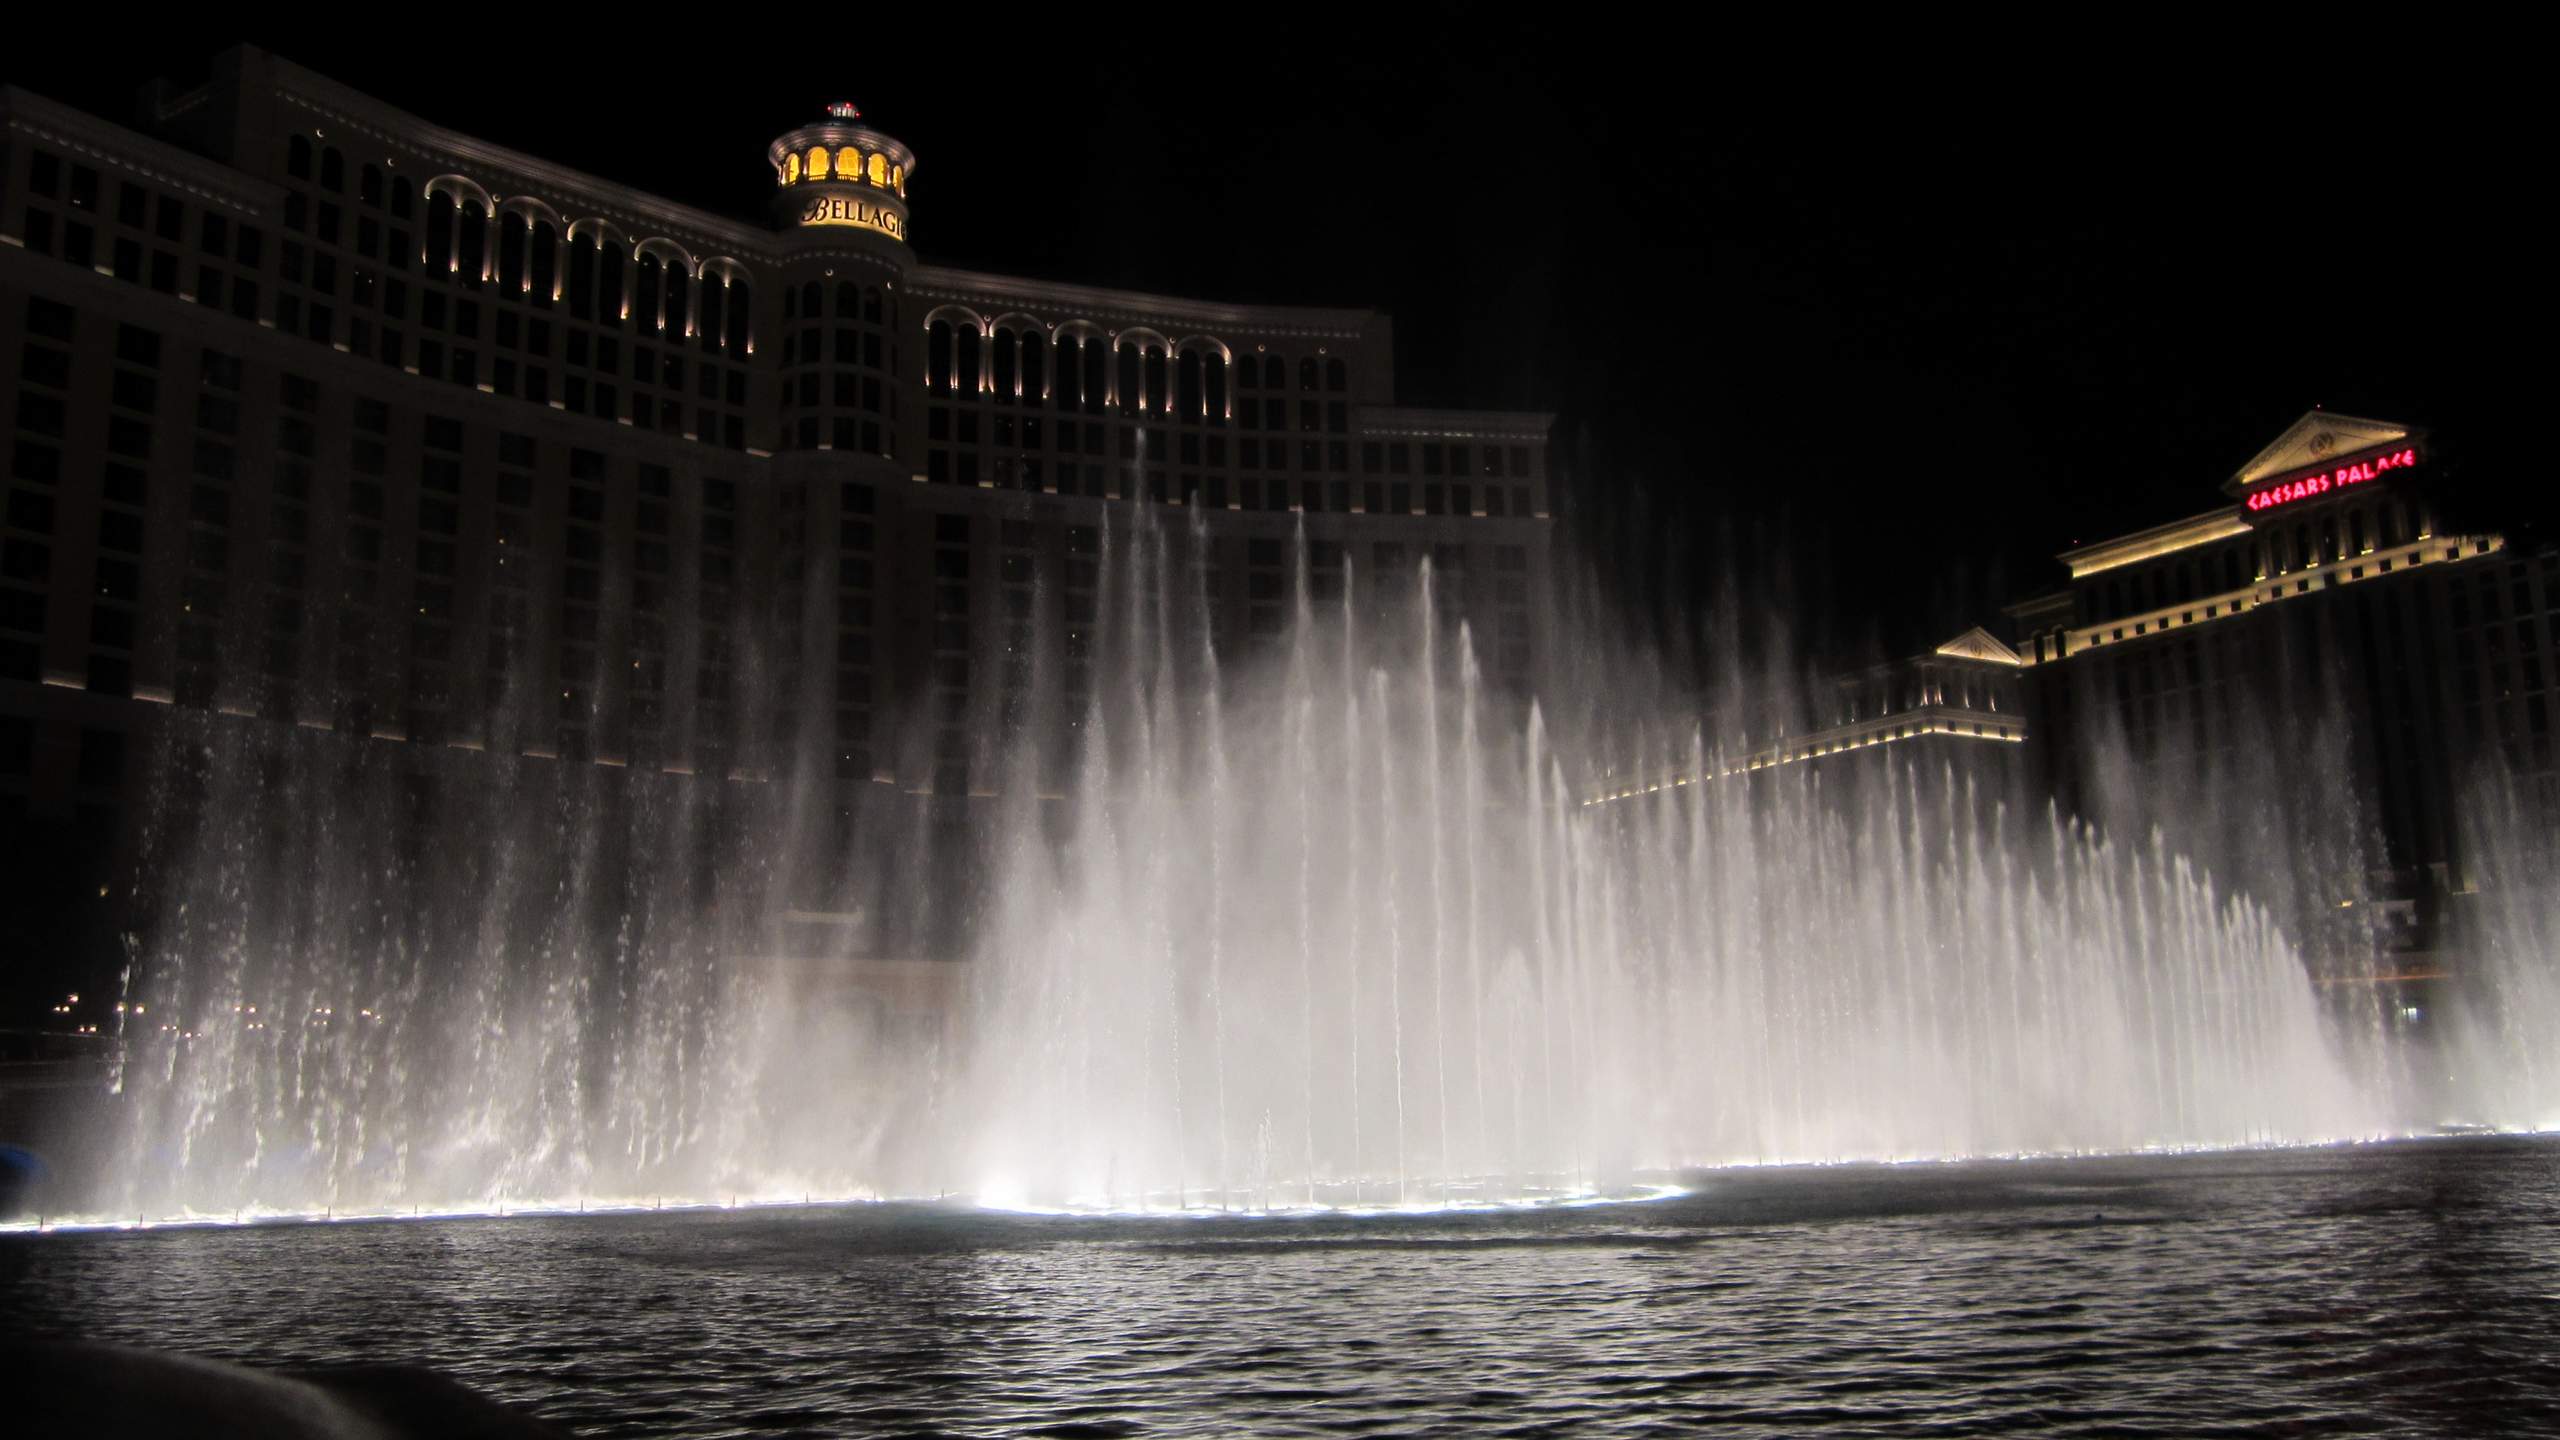 The Fountains of Bellagio, which were choreographed to music every 15 minutes.